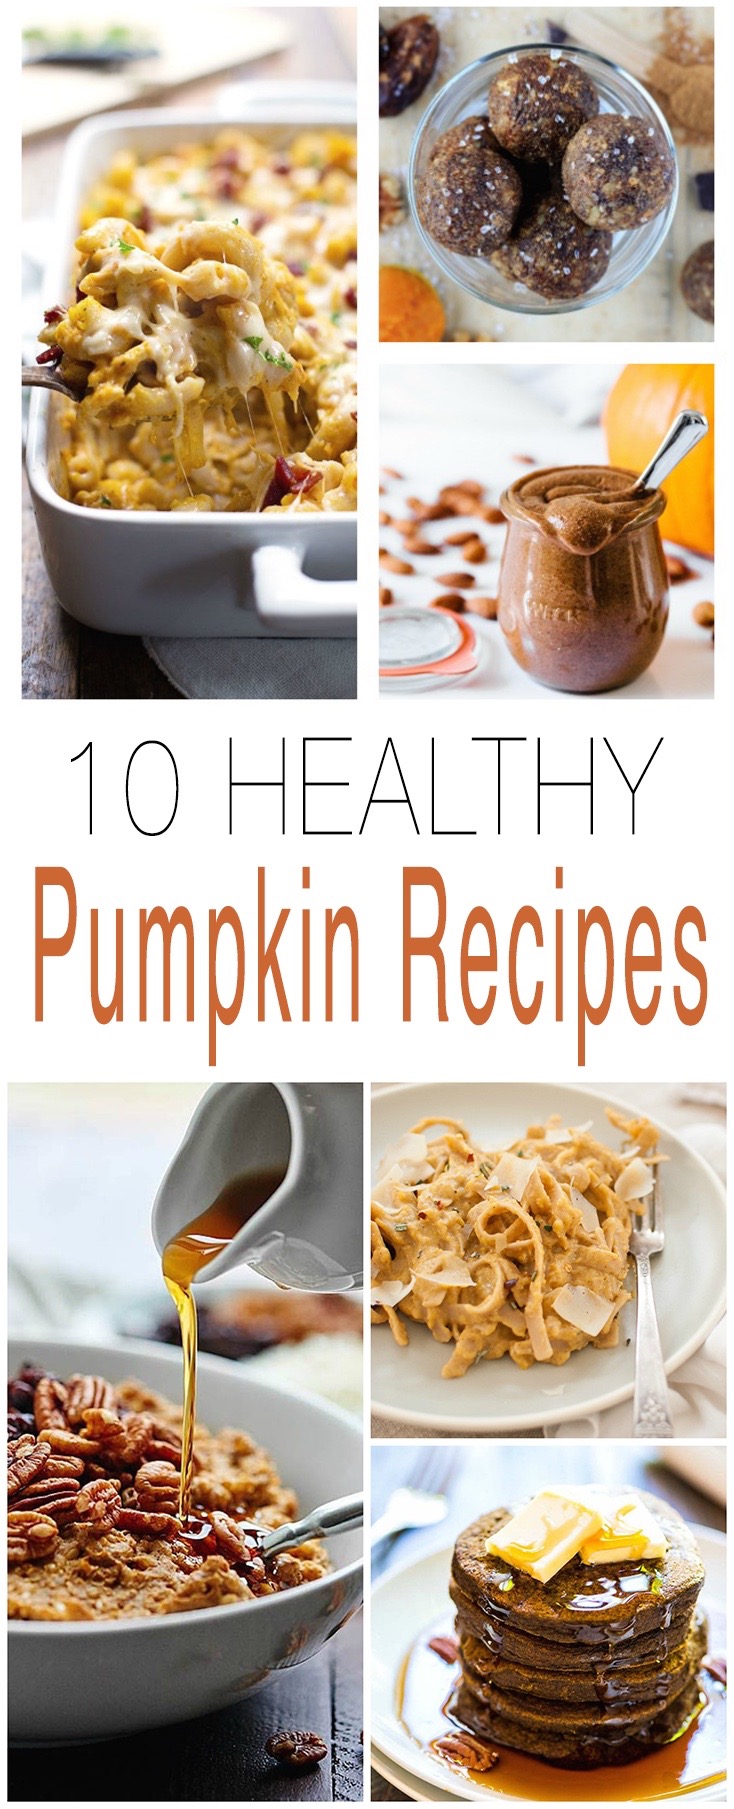 From breakfast, to dessert, and everything in between.. 10 Healthy Whole-Food Pumpkin Recipes to try out this Fall.